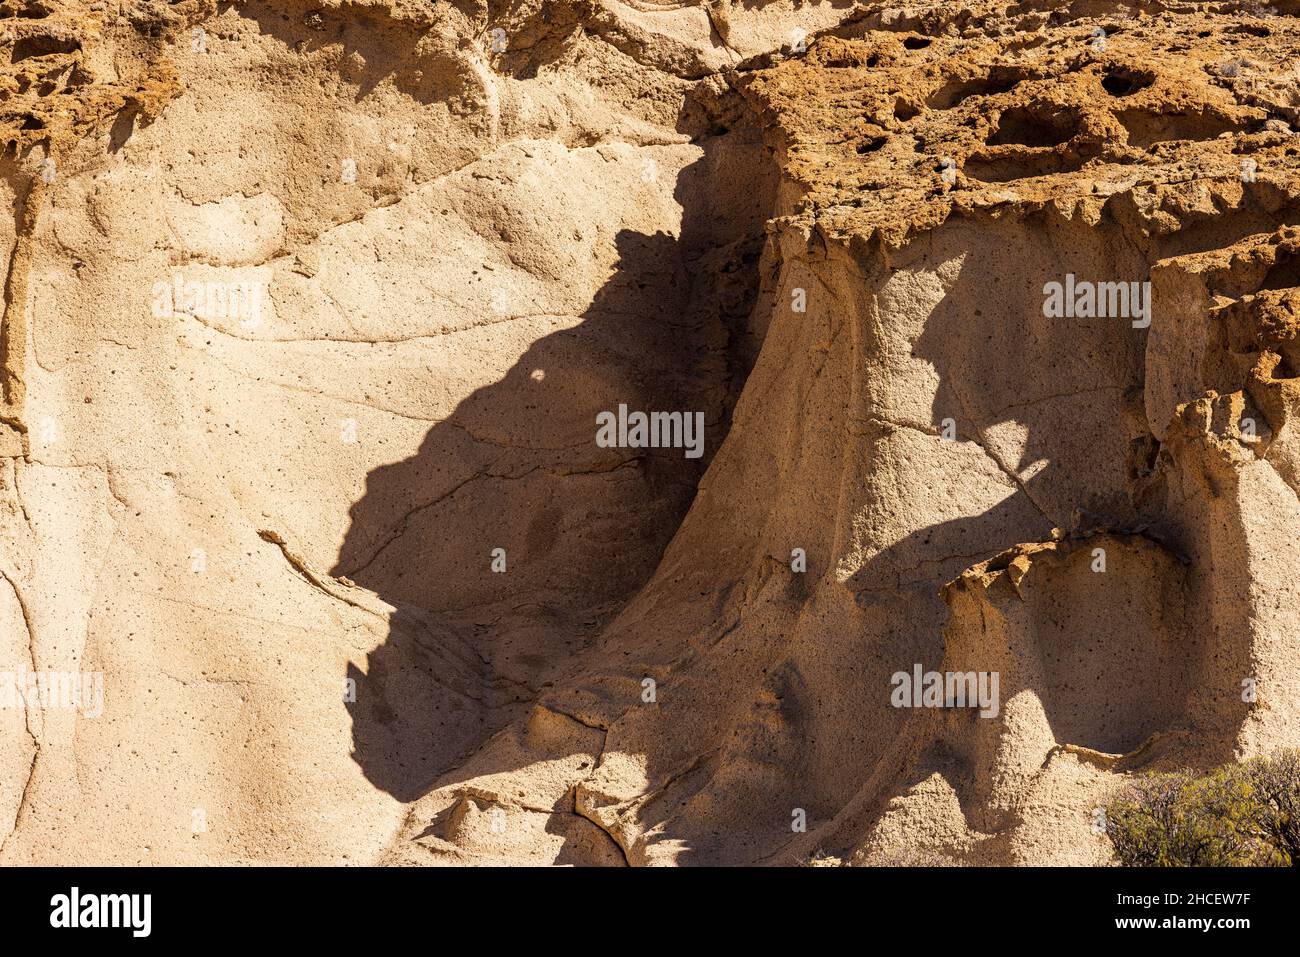 Big cat shadow formed by rock shapes in an area of wind eroded pumice stone known as the Natural monument of Los Derriscaderos in Granadilla, Tenerife Stock Photo